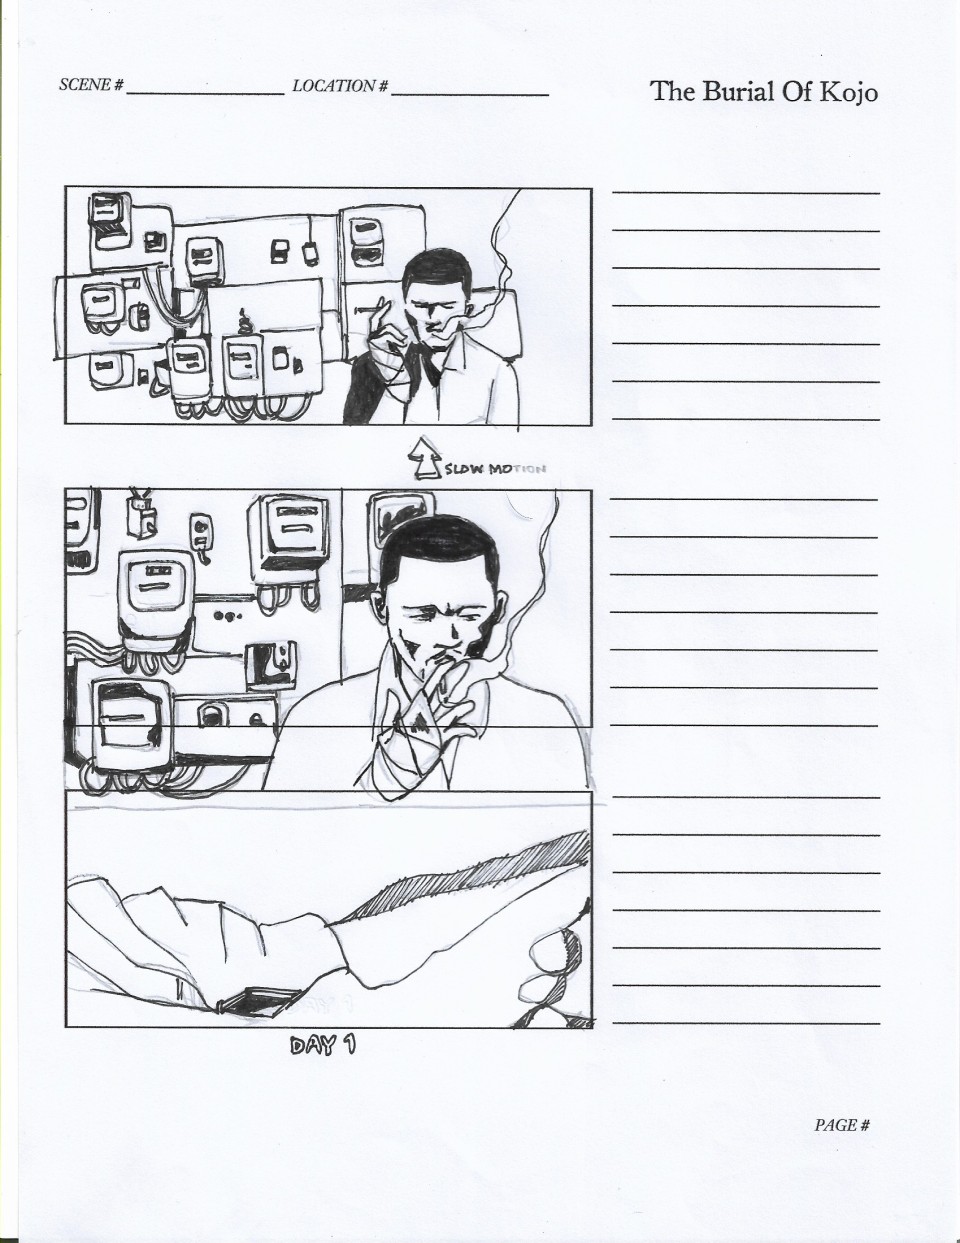 Storyboard from the film "The Burial of Kojo" shows three sketches of a person lighting a cigarette in front of a wall filled with miscellaneous items.